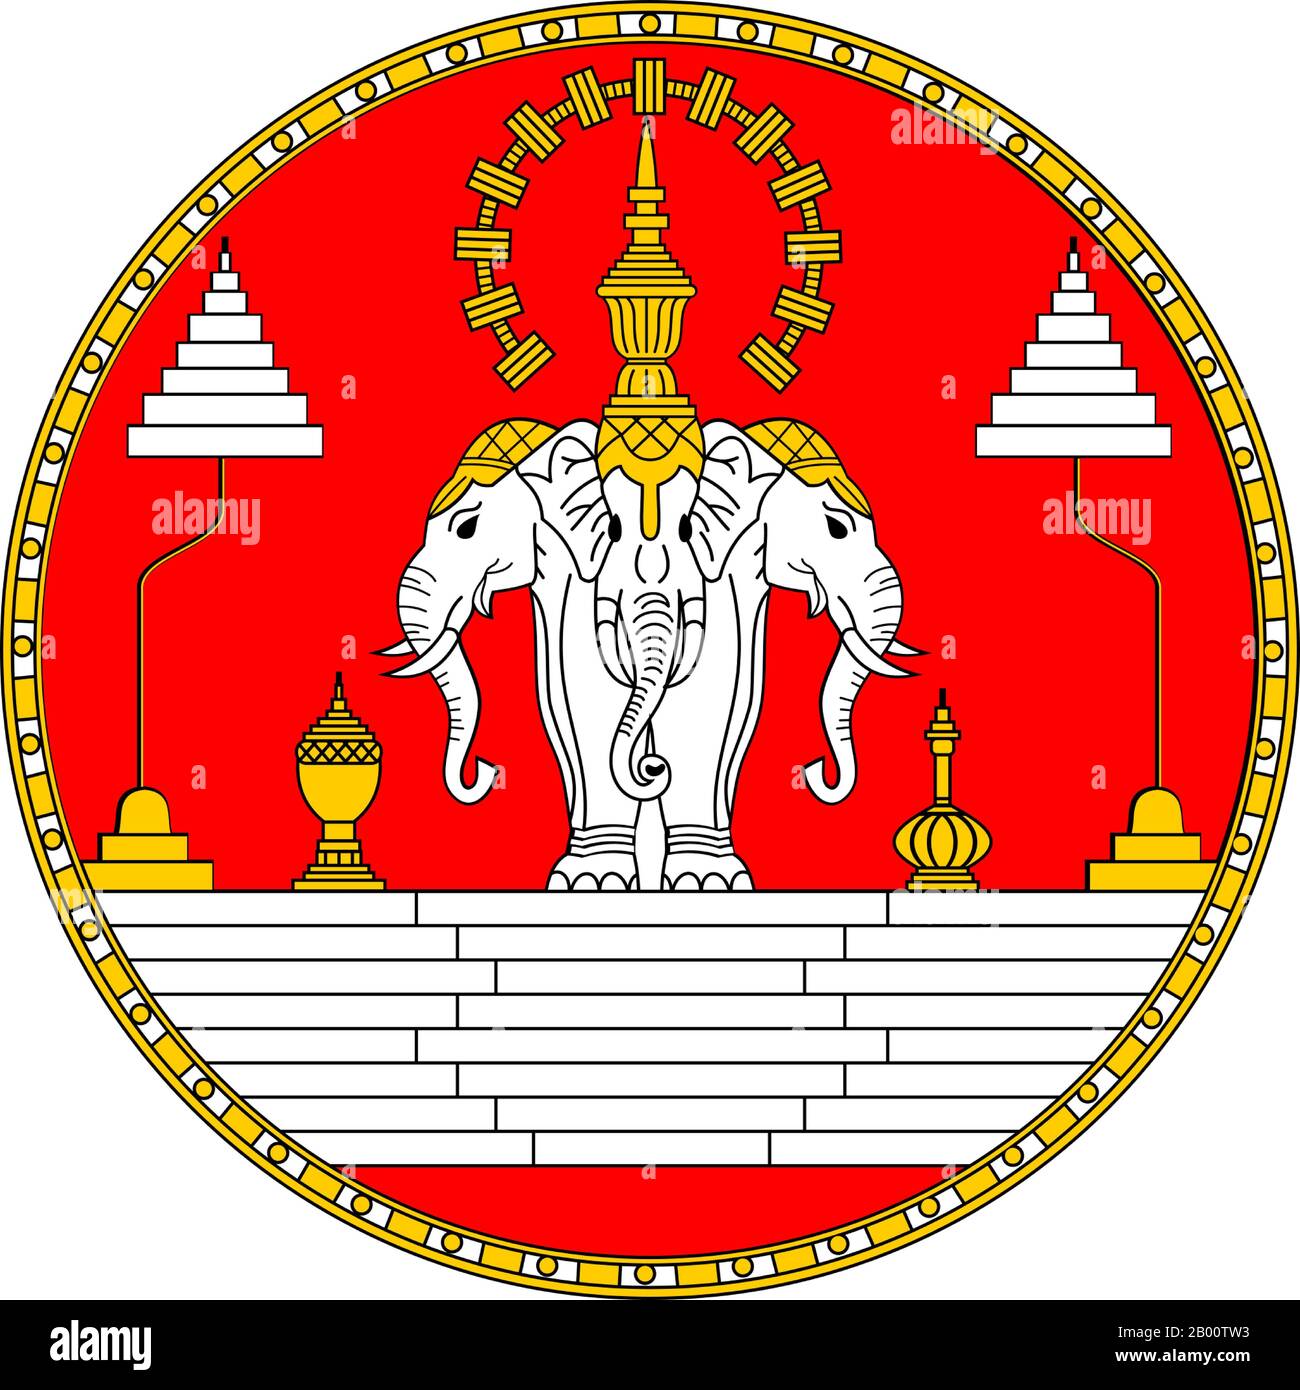 Laos: The Royal Standard of Laos, 1949-1975.  The Royal Lao flag is a three headed elephant referred to as an Erawan. The three headed elephant generally has the layered 'umbrella' over its heads as opposed to one on either side.   The kingdom of Laos existed from the 14th to the 18th centuries, then split into three separate kingdoms. In 1893, it became a French protectorate, with the three kingdoms—Luang Prabang, Vientiane and Champasak—uniting to form what is now known as Laos.  The country briefly gained independence in 1945 after Japanese occupation, but returned to French rule until 1954 Stock Photo